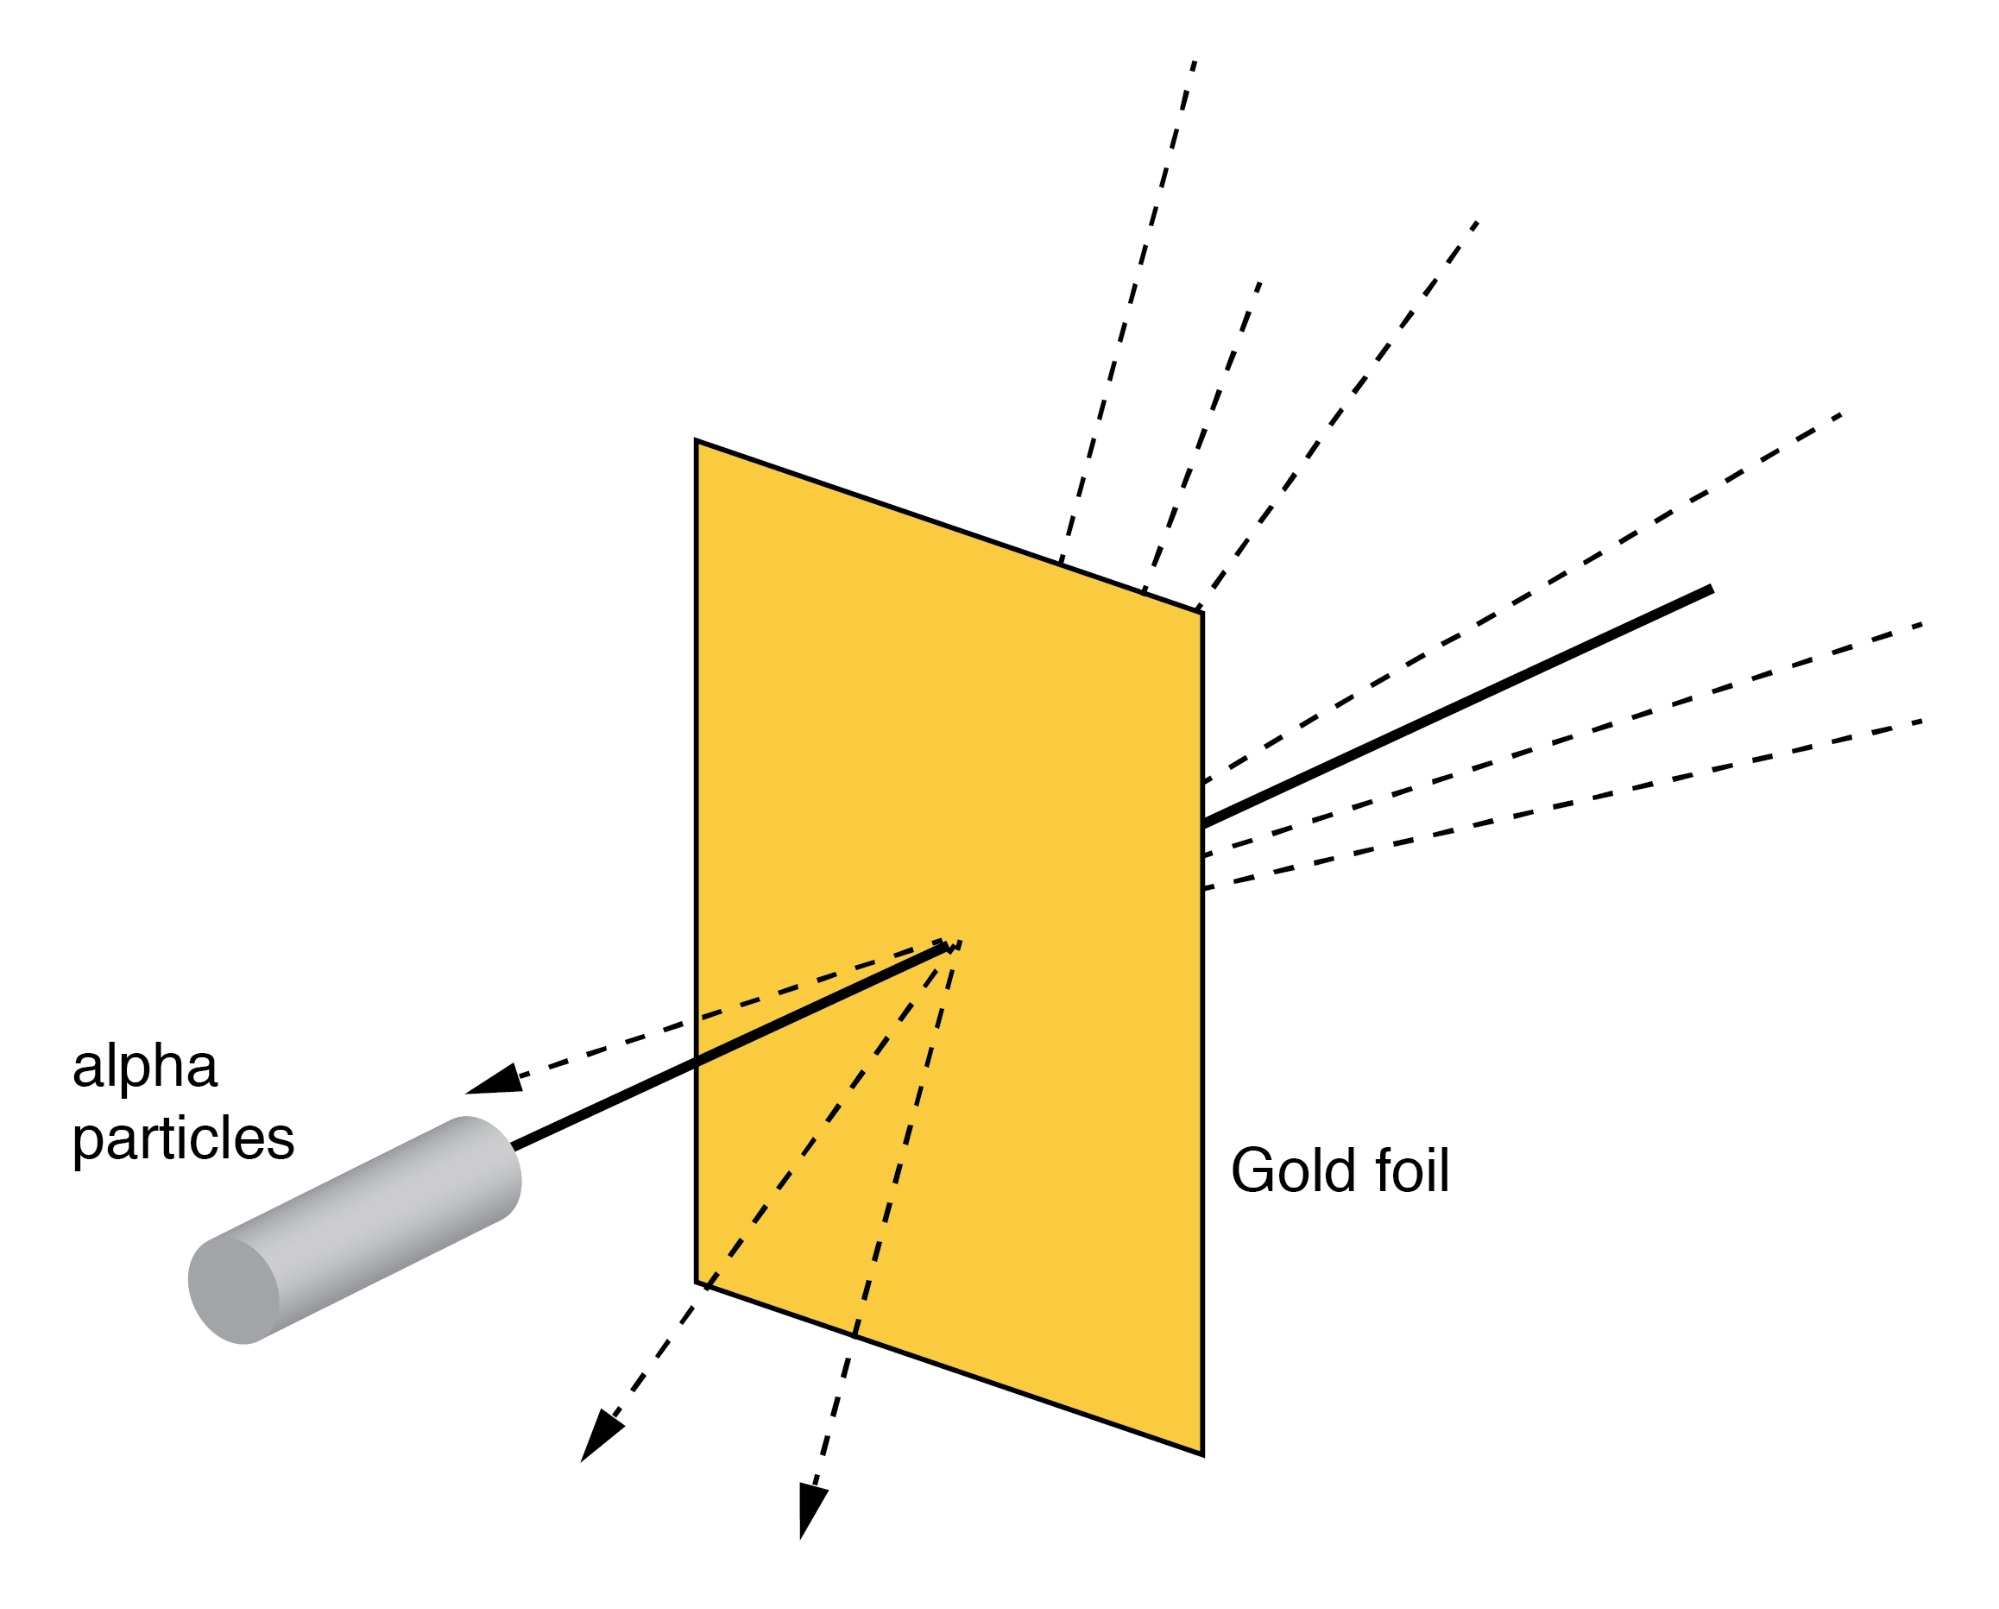 Rutherford scattering: a beam of alpha particles is scattered by a thin gold foil.